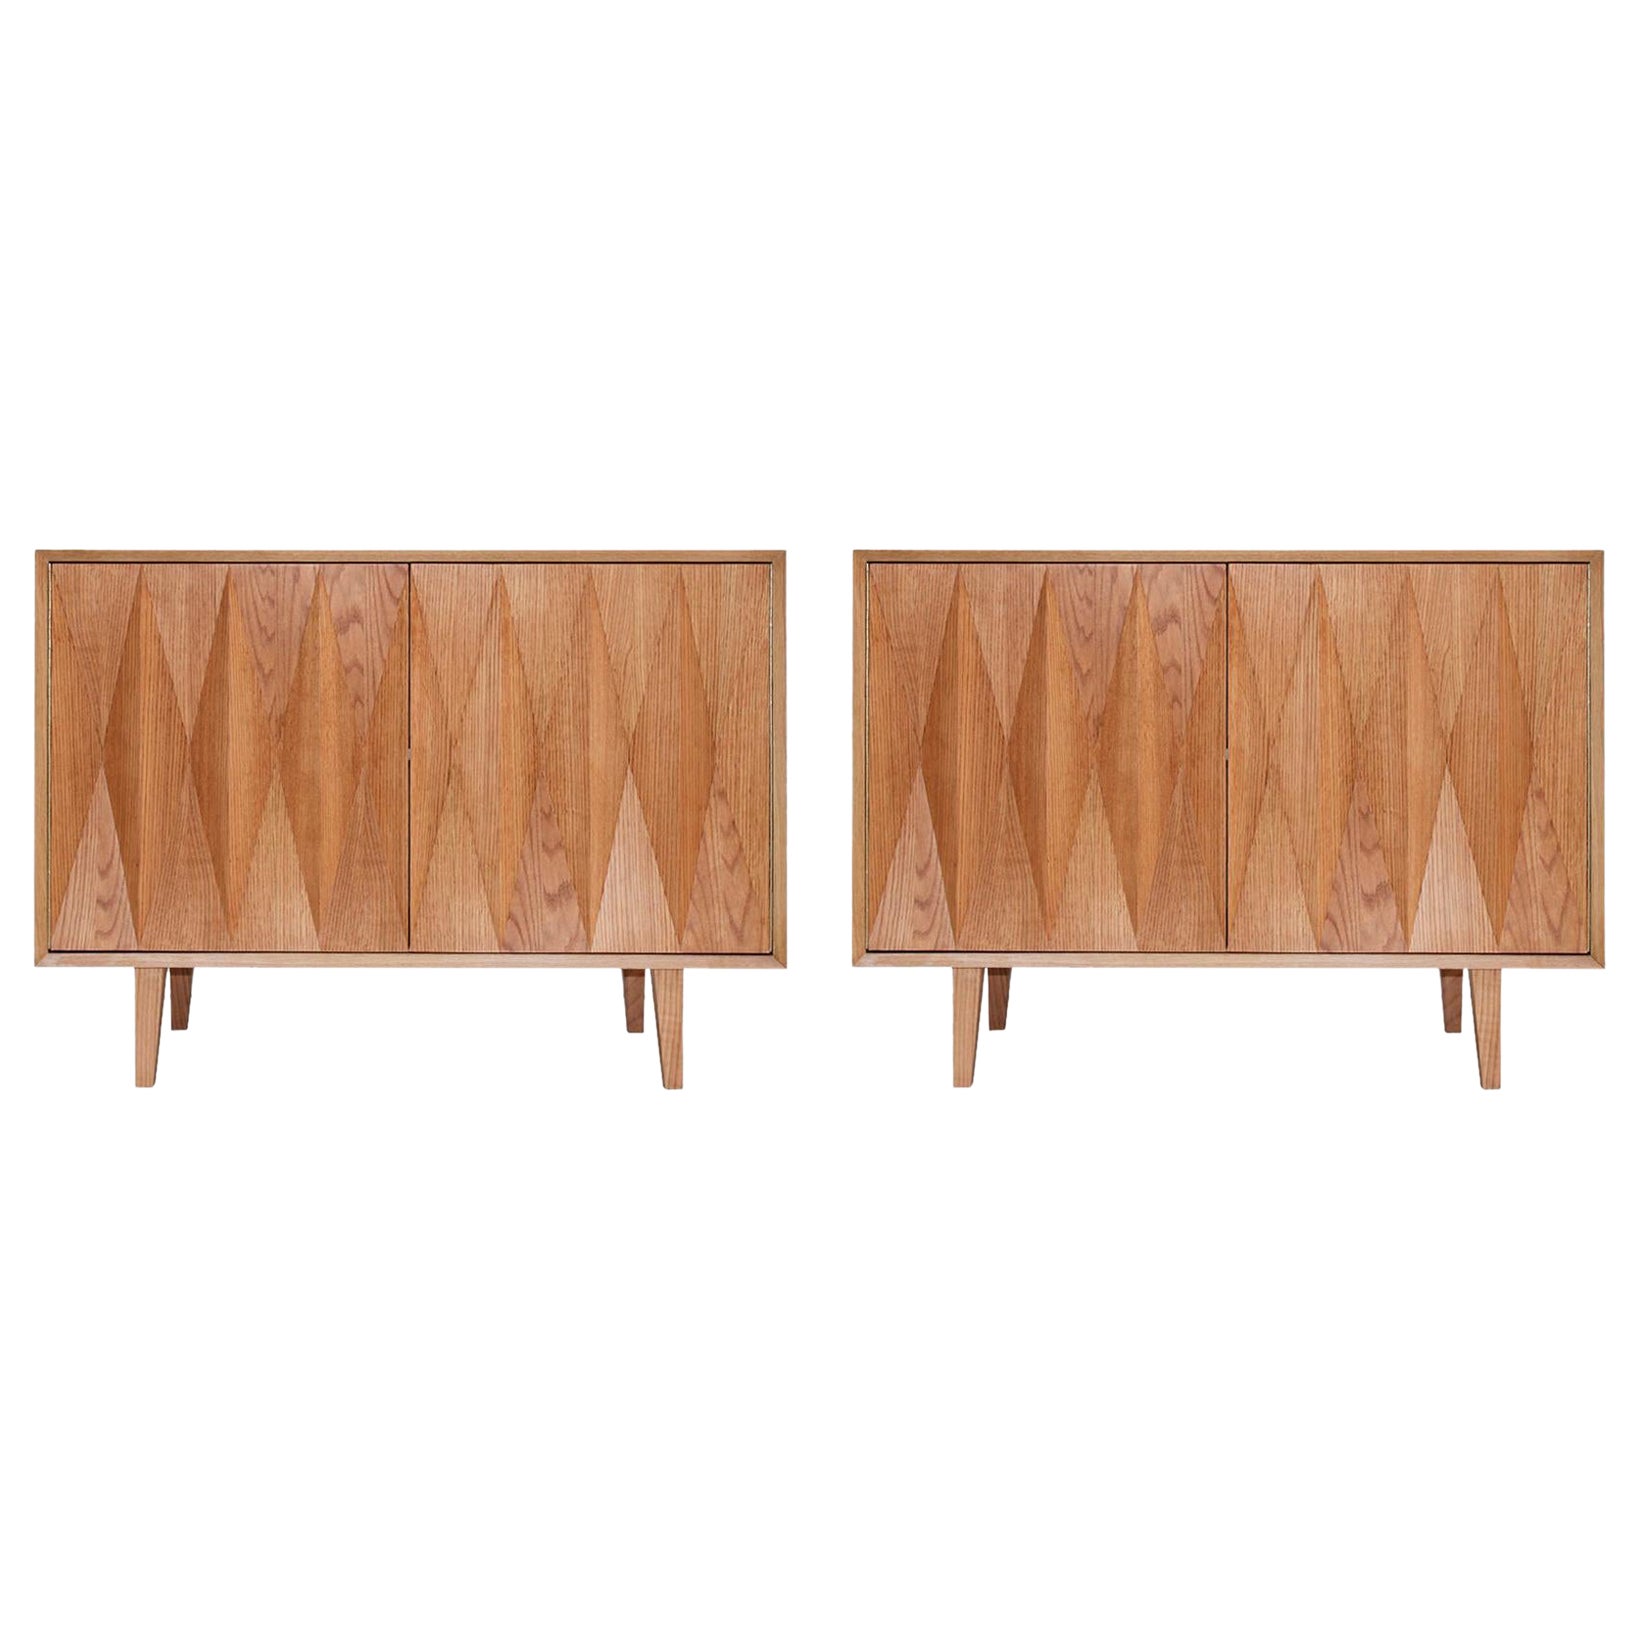 Mid-Century Modern Style Oak Wood Pair of Italian Sideboards by L.a Studio For Sale